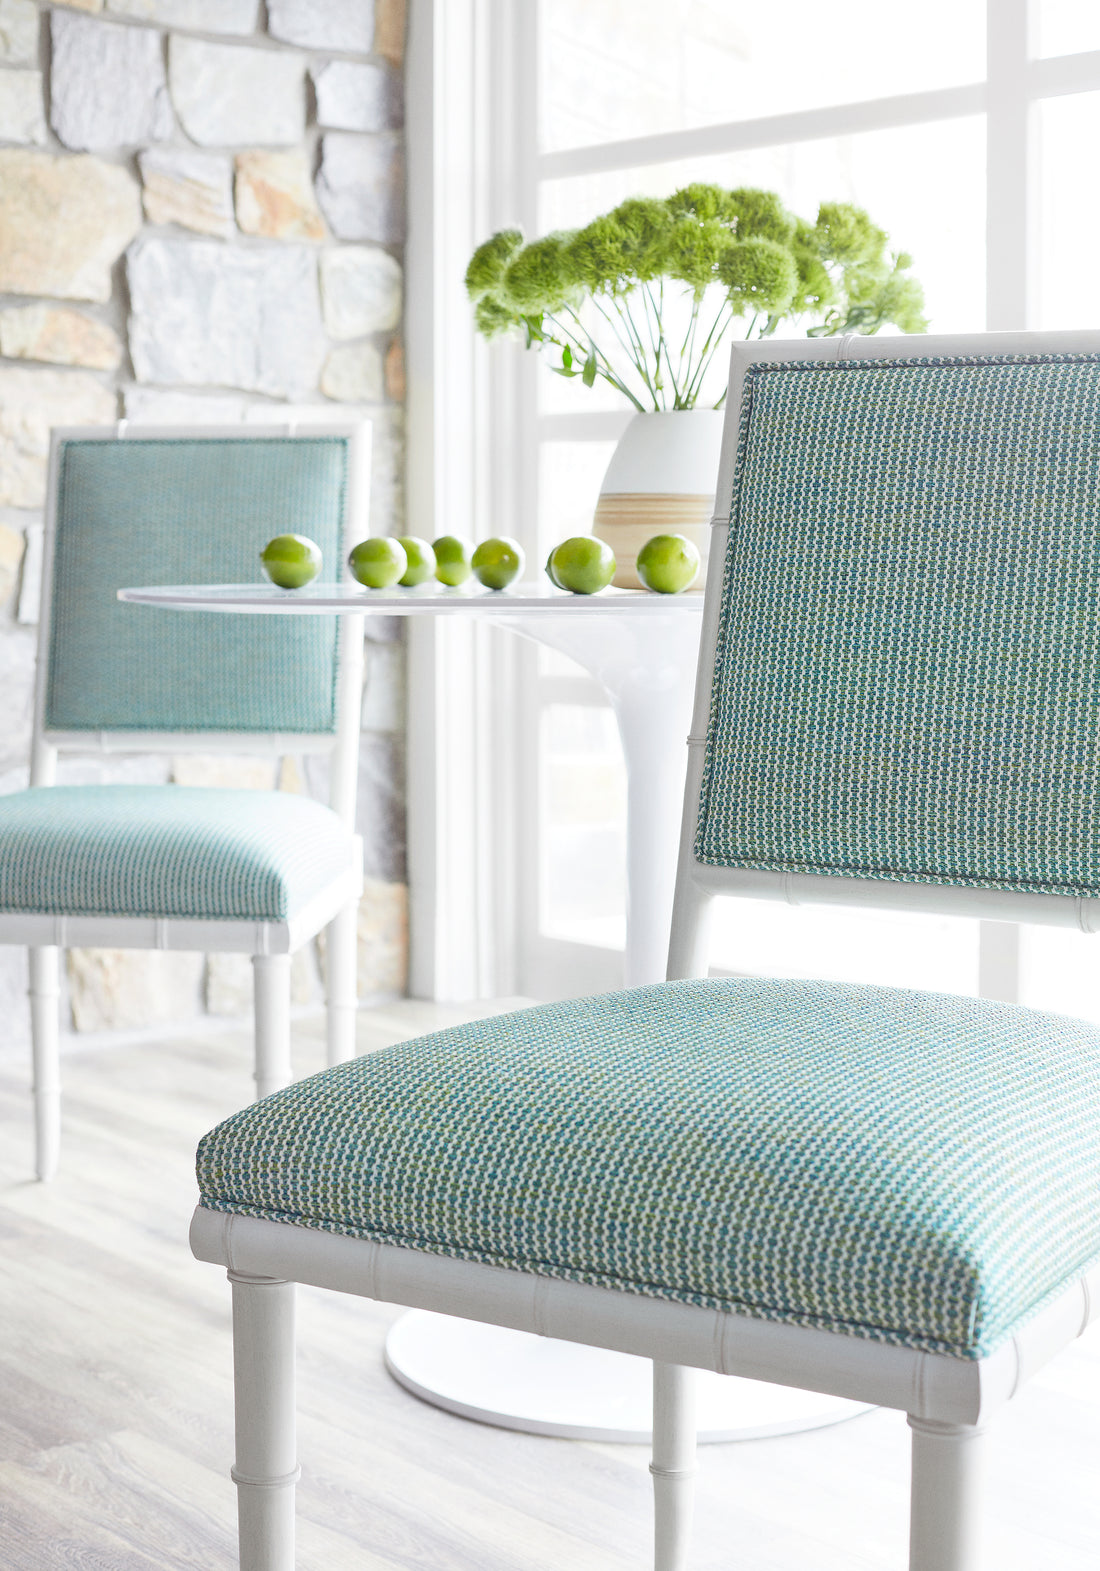 Darien Dining Chairs upholstered in Thibaut Ryder woven fabric in Emerald color - pattern W74086